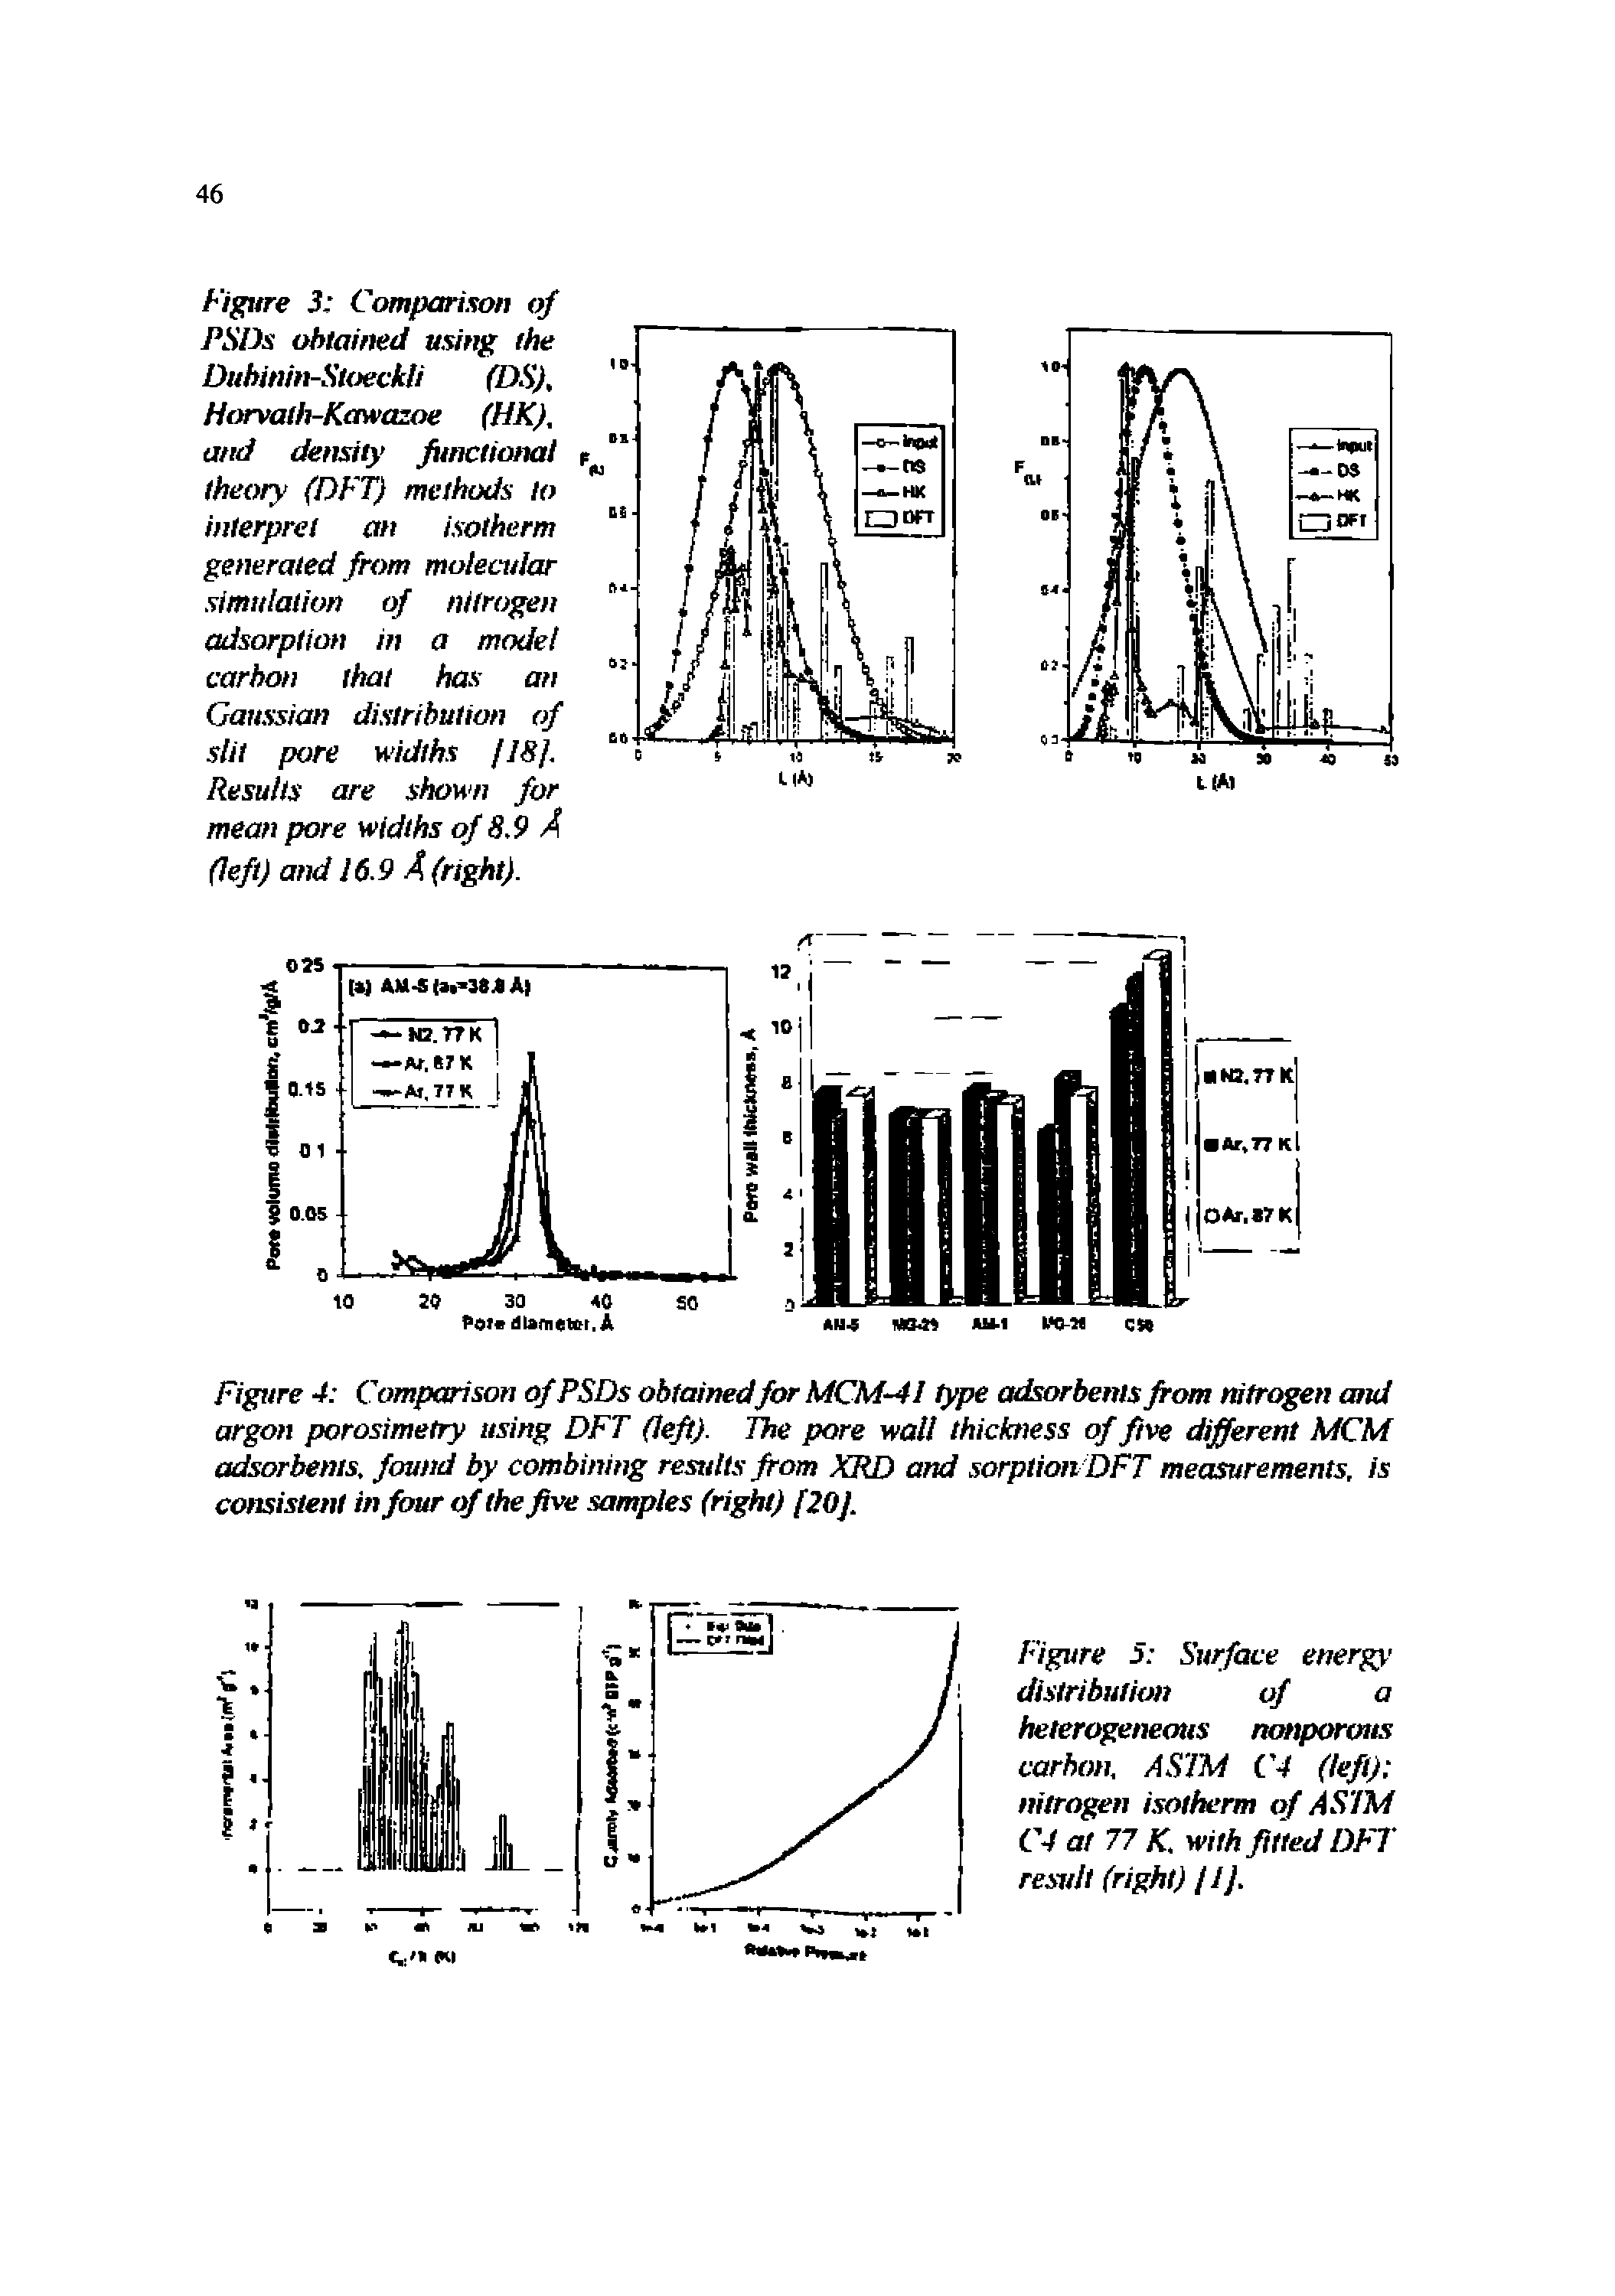 Figure 4 Comparison of PSDs obtainedfor MCM-41 type adsorbents from nitrogen and argon porosimetry using DFT (left). The pore wall thickness of five different MCM adsorbents, found by combining results from XRD and sorption DFT measurements, is consistent in four of the five samples (right) [20].